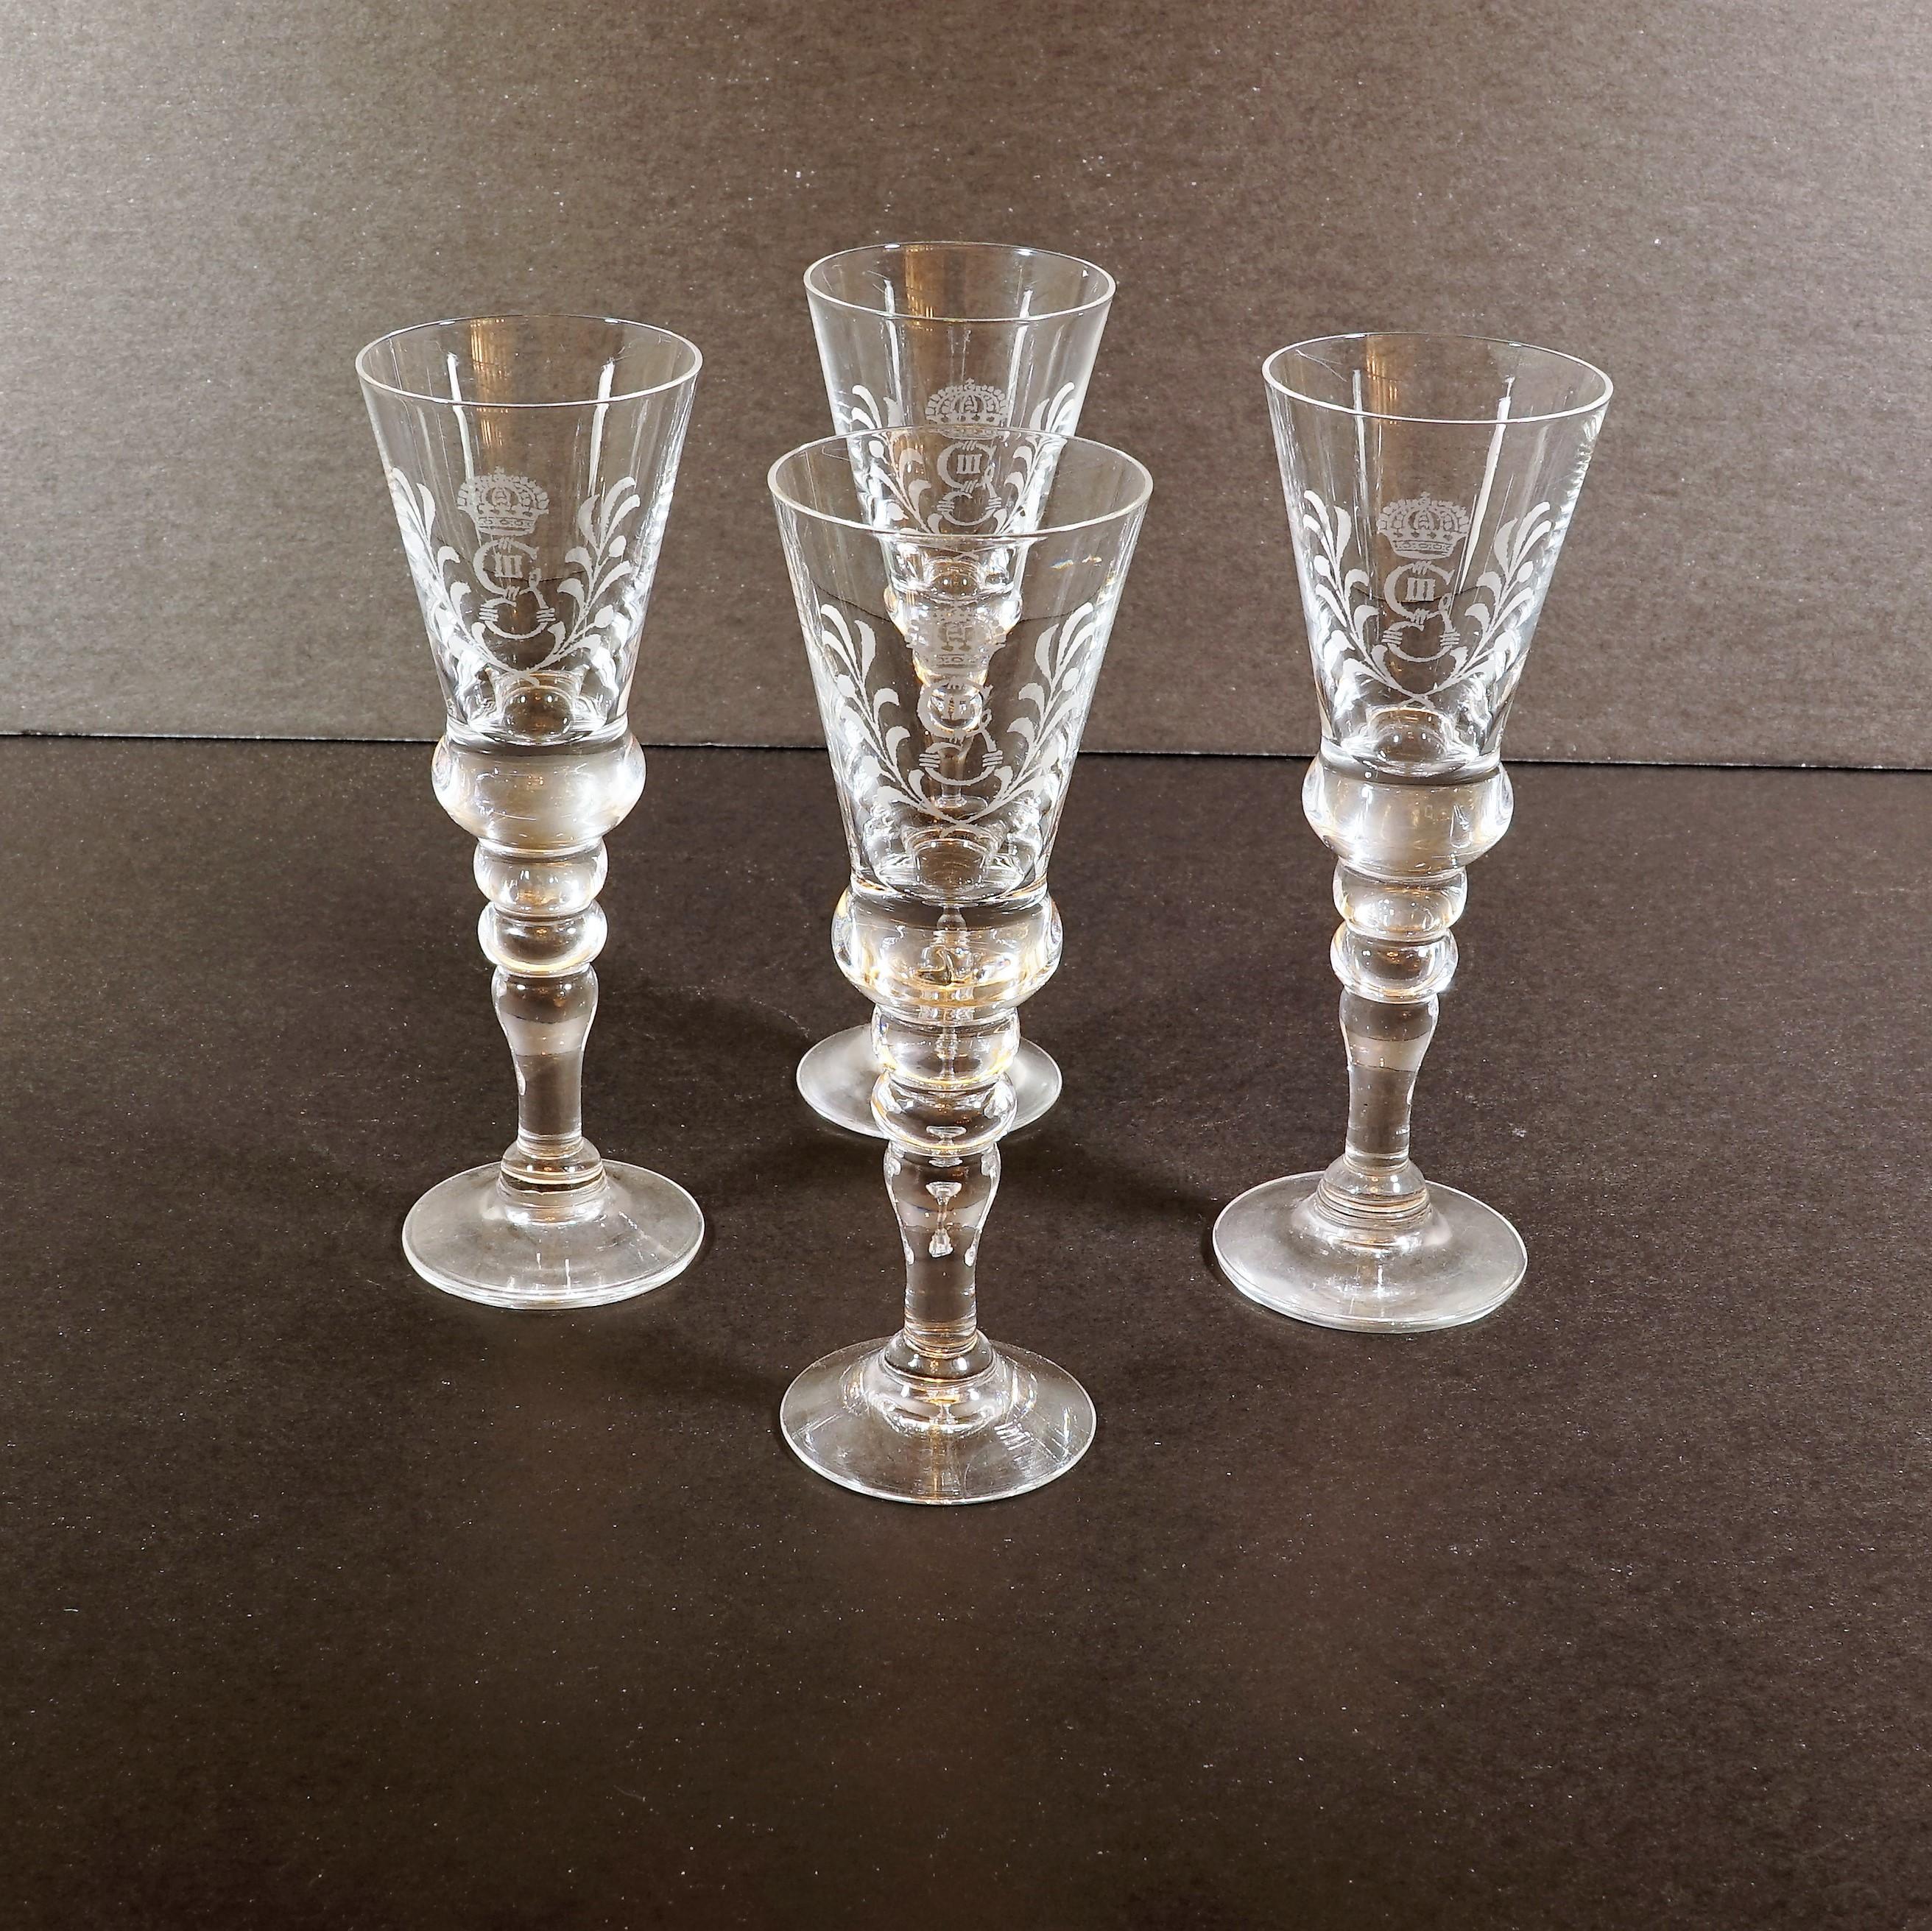 Stylized with the marque of Gustav III, this simple set of snaps glasses evokes the glory of the Swedish Empire for the bourgeoisie of the Swedish Grace period. The glass is designed to keep snaps as cold as possible ahead of toasting.